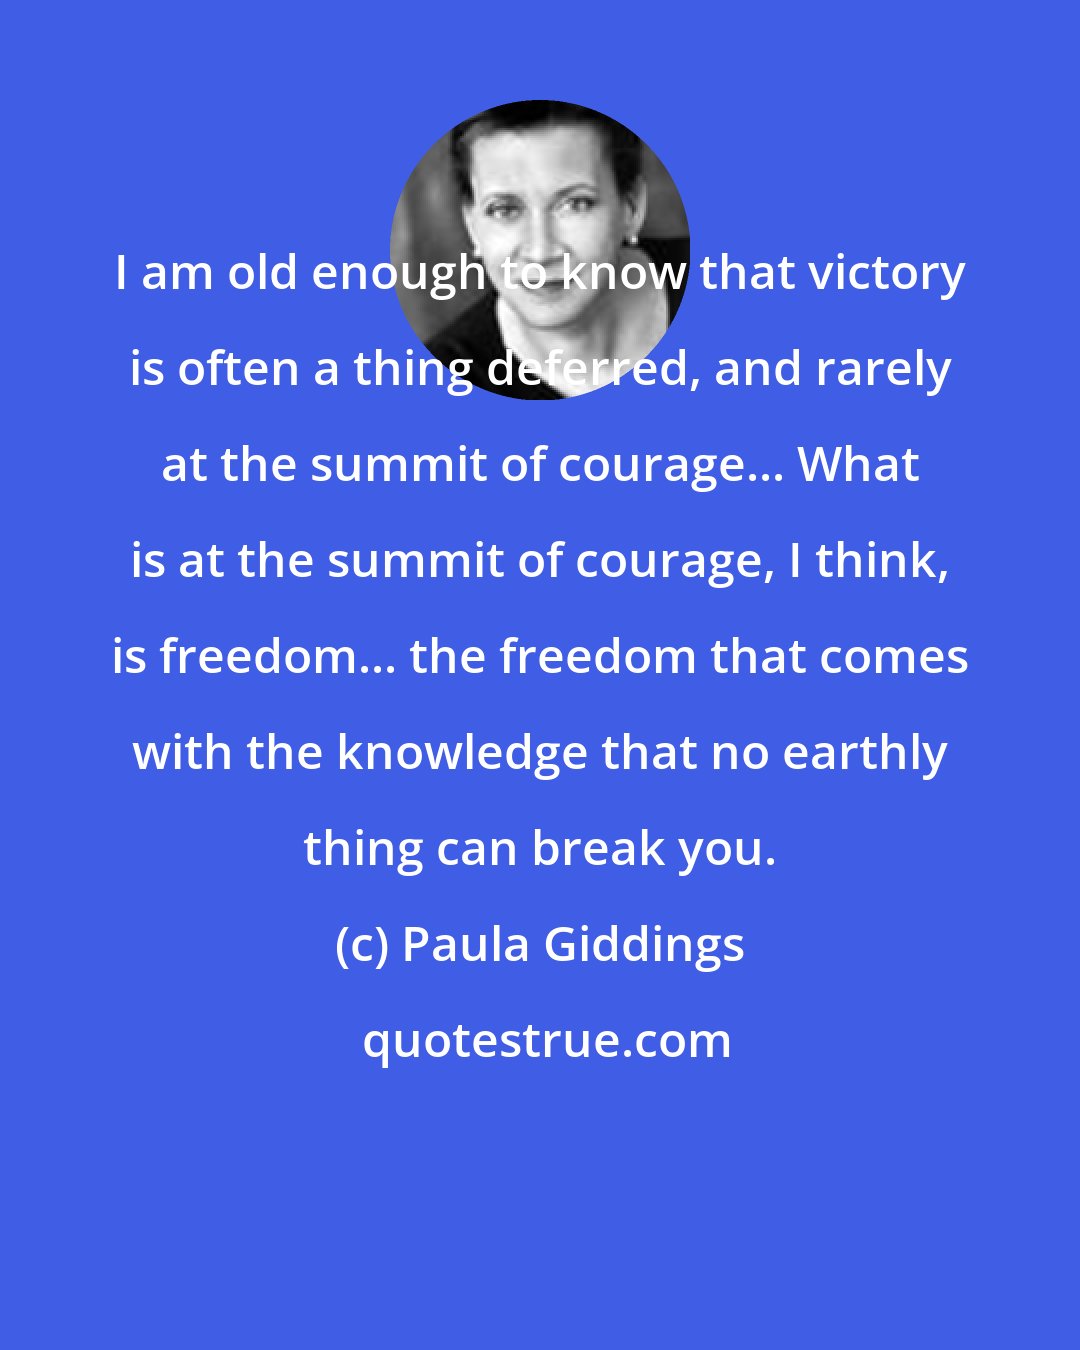 Paula Giddings: I am old enough to know that victory is often a thing deferred, and rarely at the summit of courage... What is at the summit of courage, I think, is freedom... the freedom that comes with the knowledge that no earthly thing can break you.